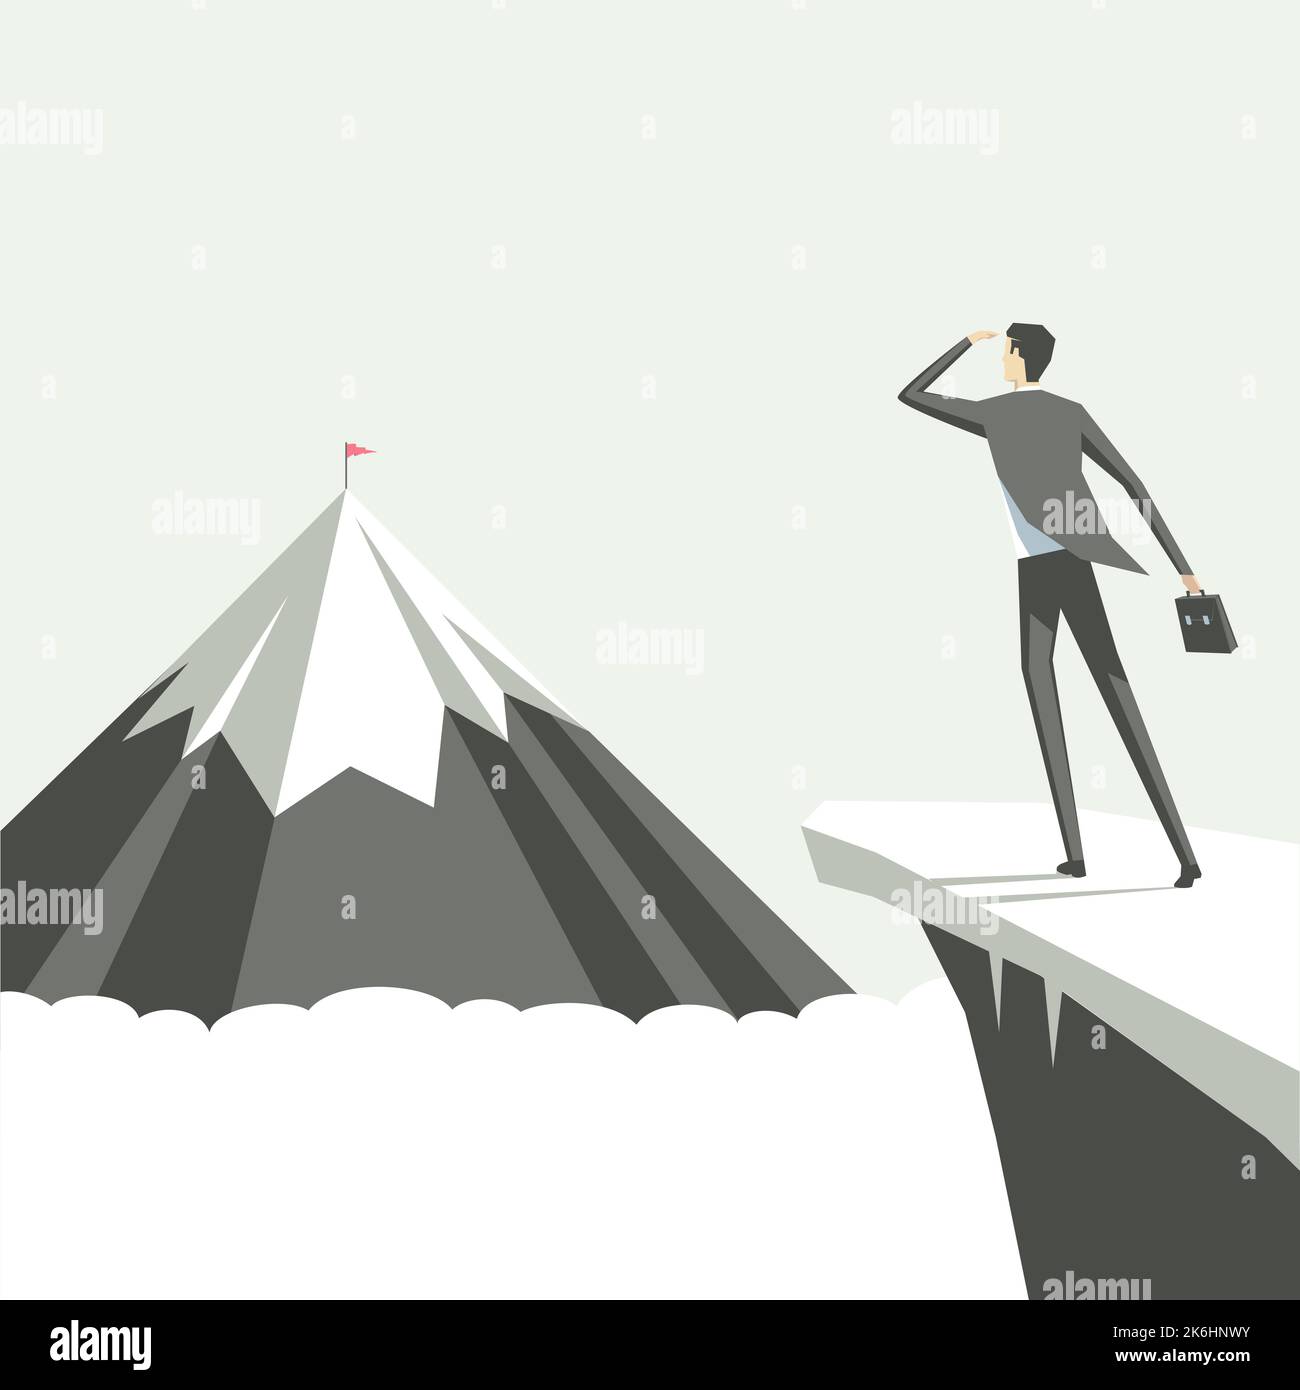 Man On A Mountain Drawing Proud Of His Climbing Success To The Clouds. Athlete On A Cliff Celebrating Achievement Ascending To The Top. Sports Guy Stock Vector